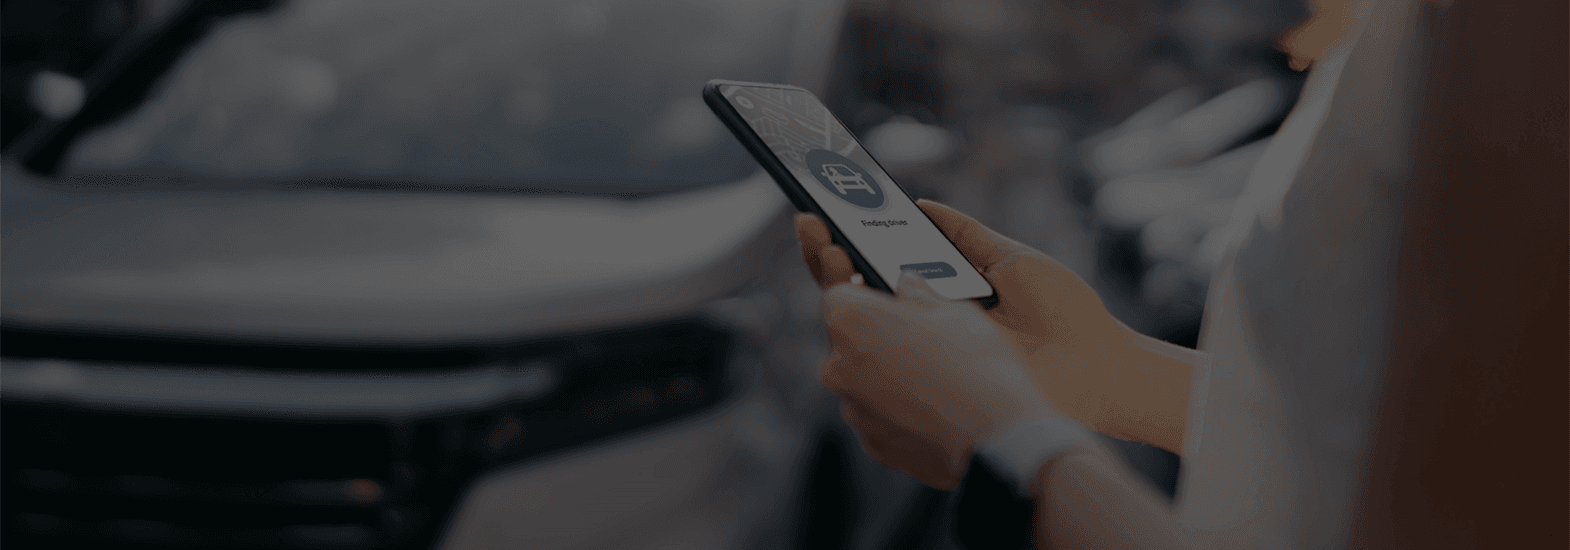 Connected Vehicle Technology Awareness Can Change Customer Attitudes Toward Dealerships